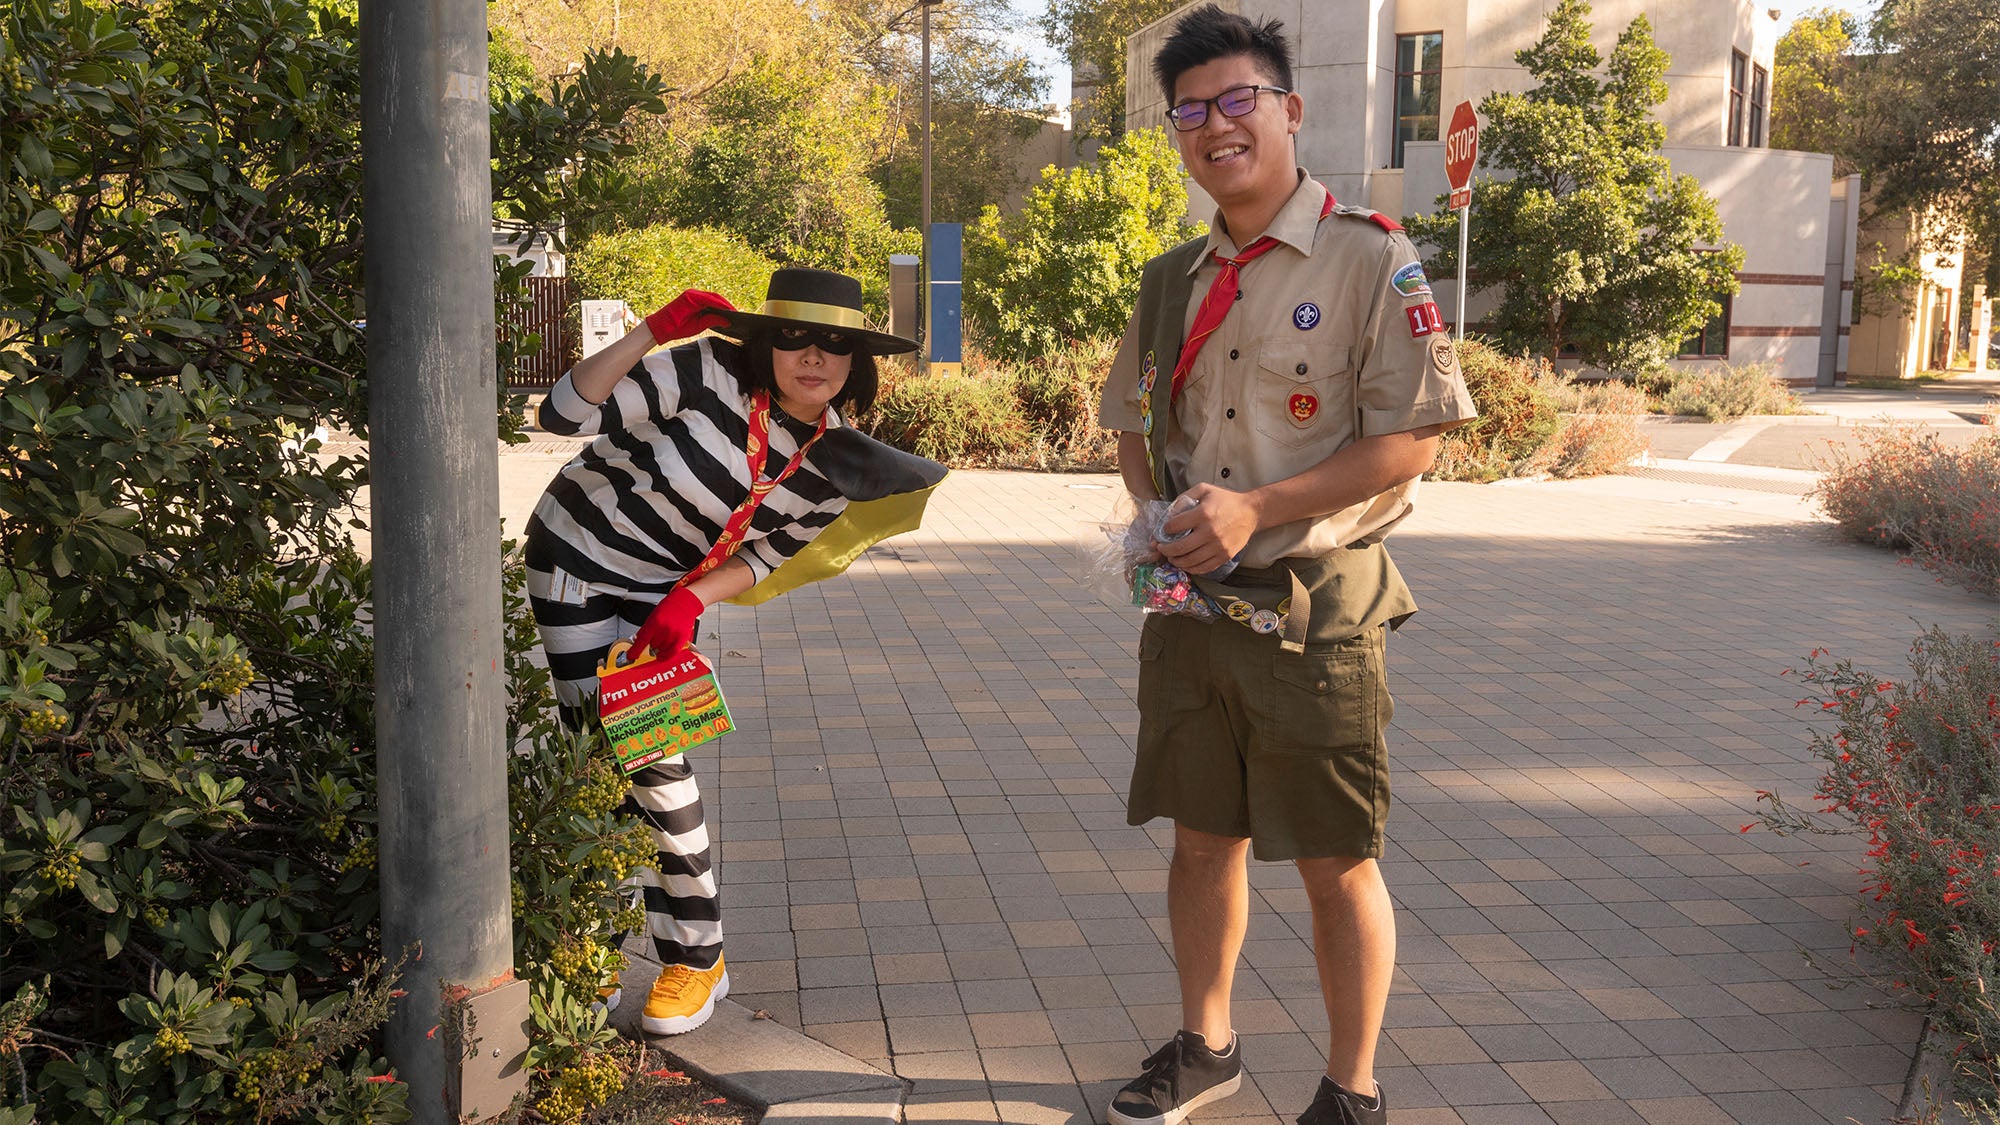 People dressed in costume: The Hamburglar and a Boy Scout